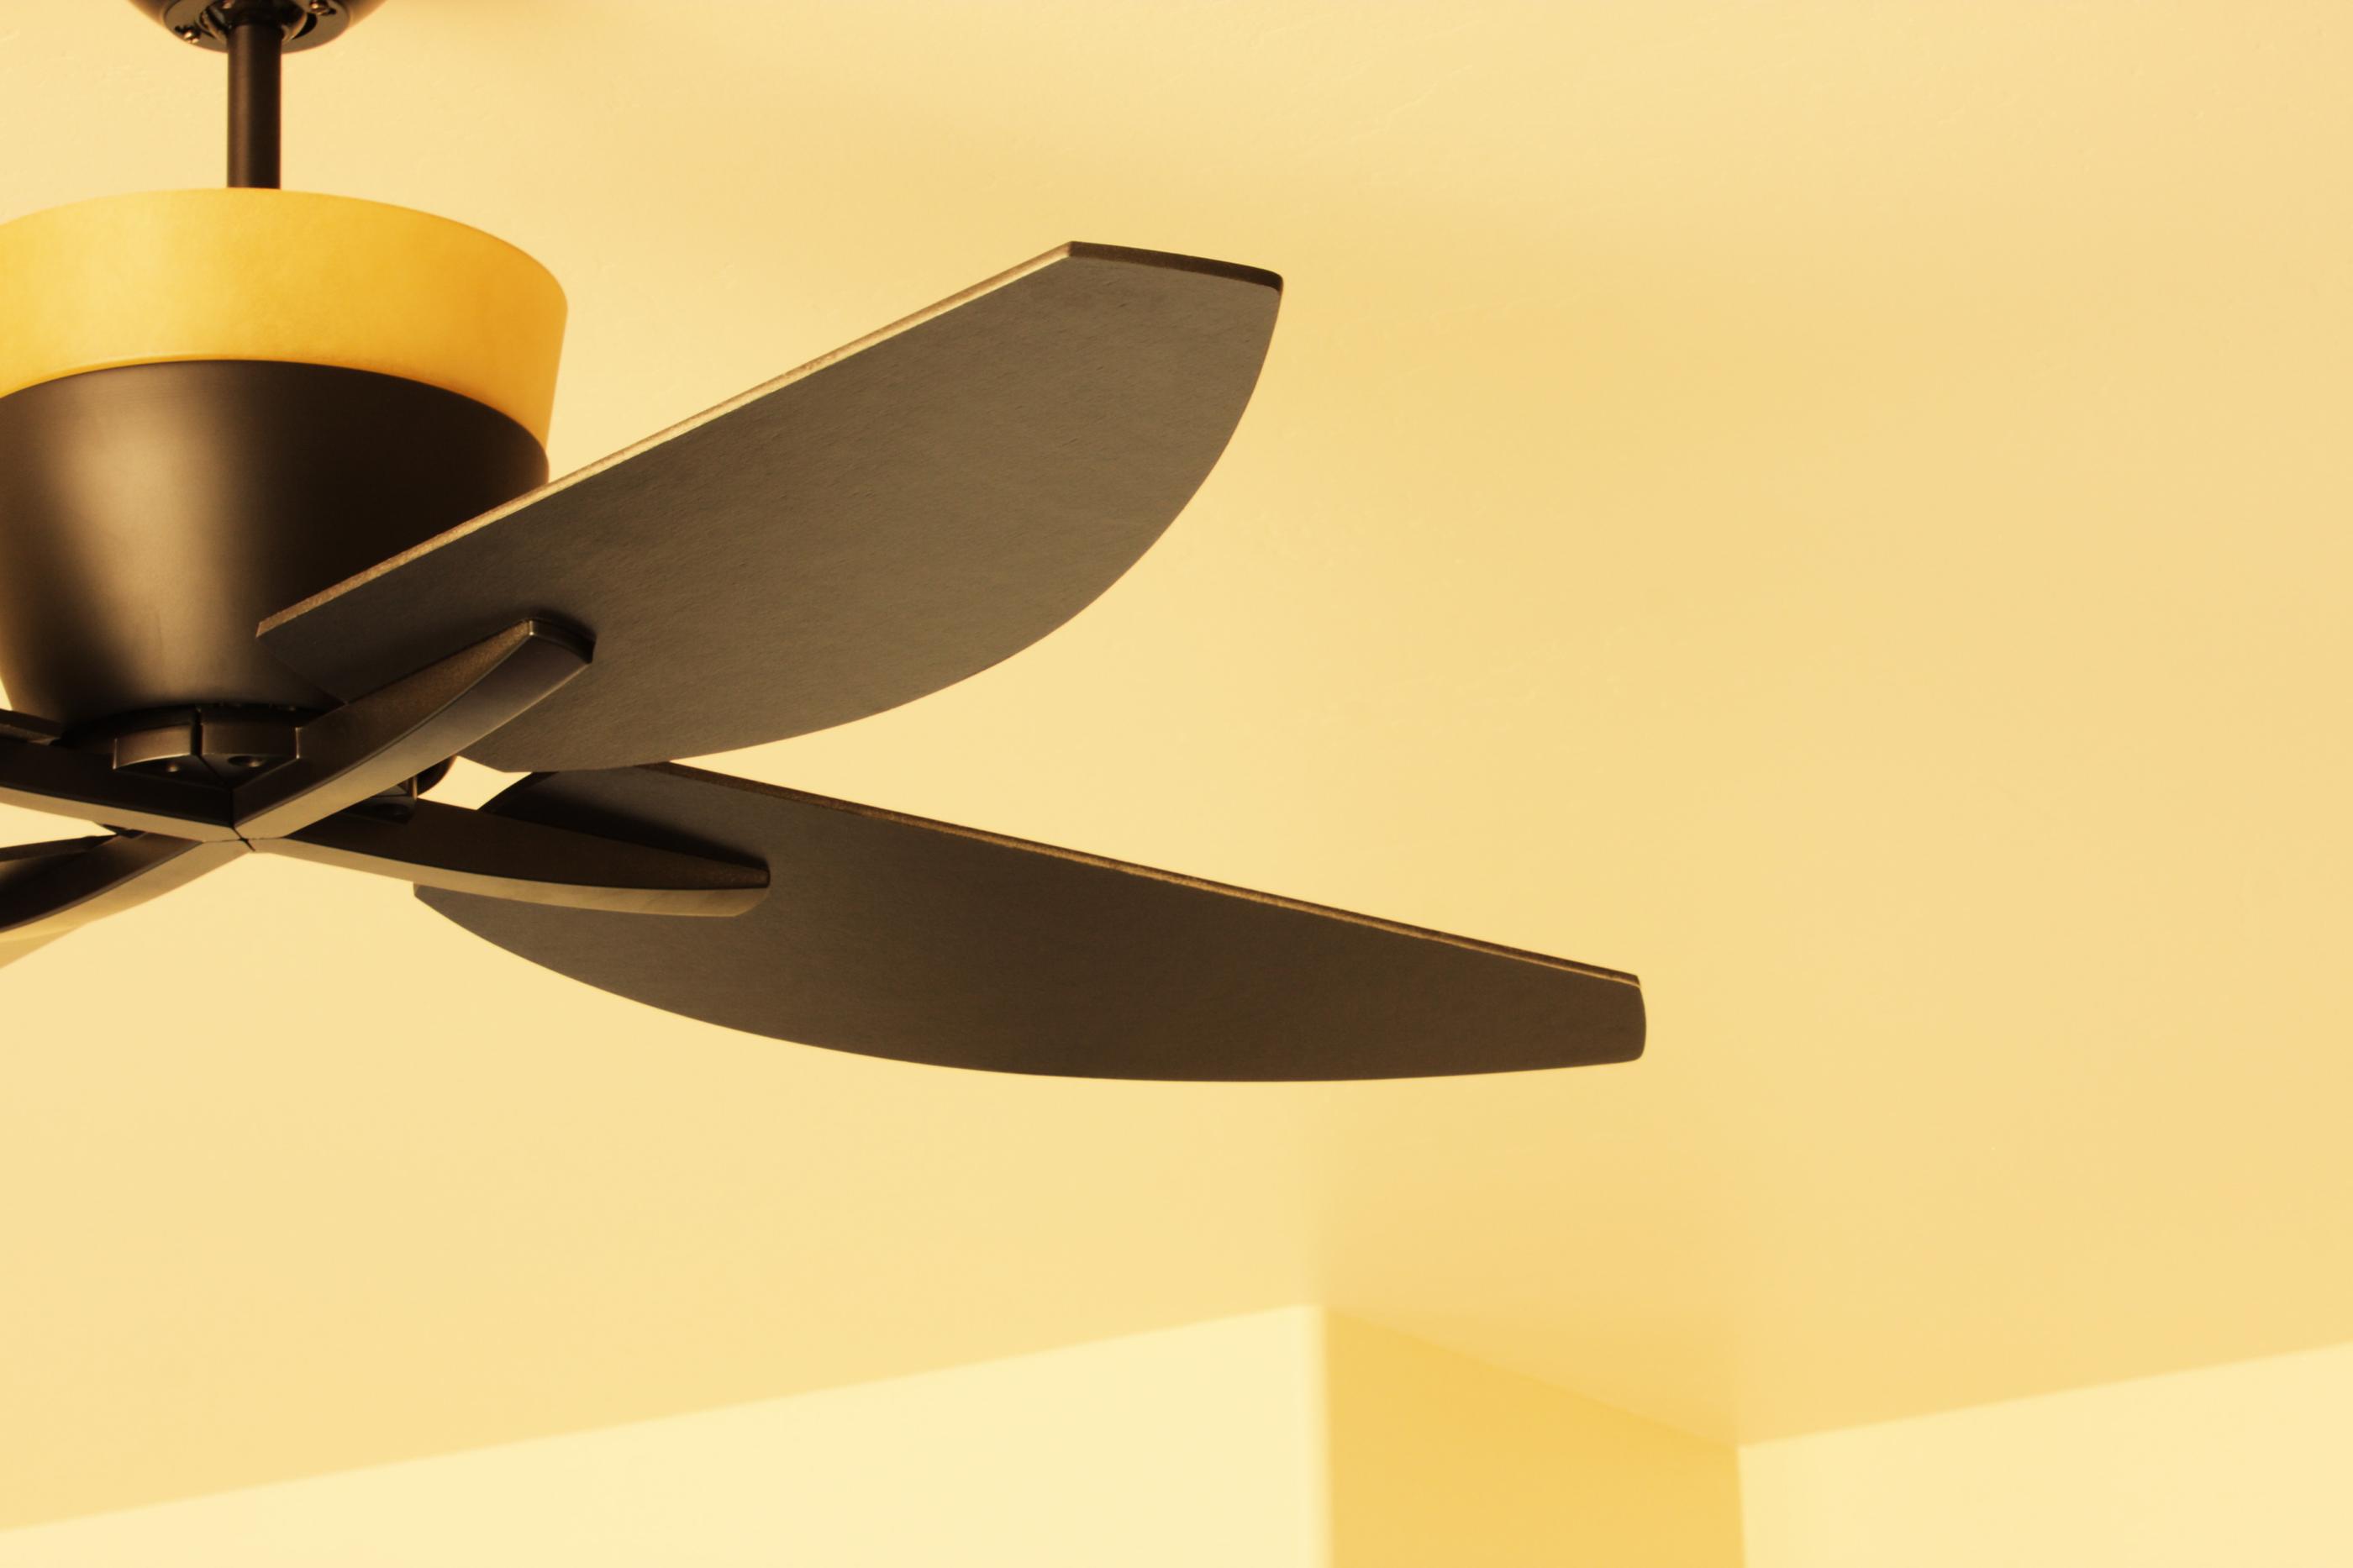 Cieling fan installed by Mister Sparky in Charleston